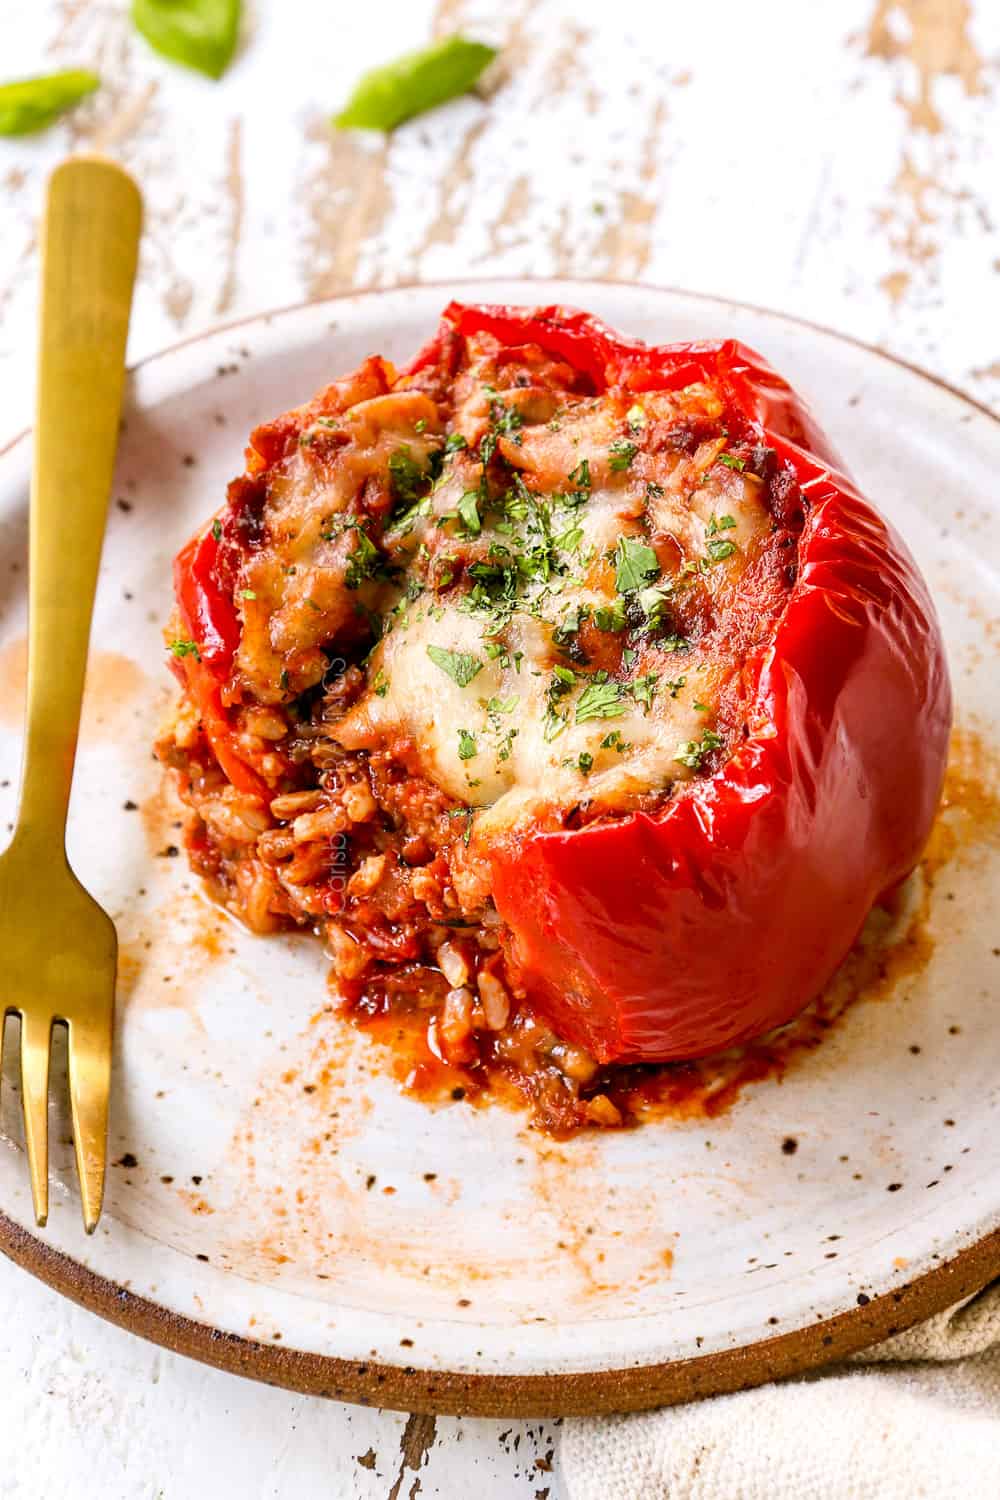 stuffed bell pepper on a plate with a bite take out so you can see the Italian sausage and rice filling